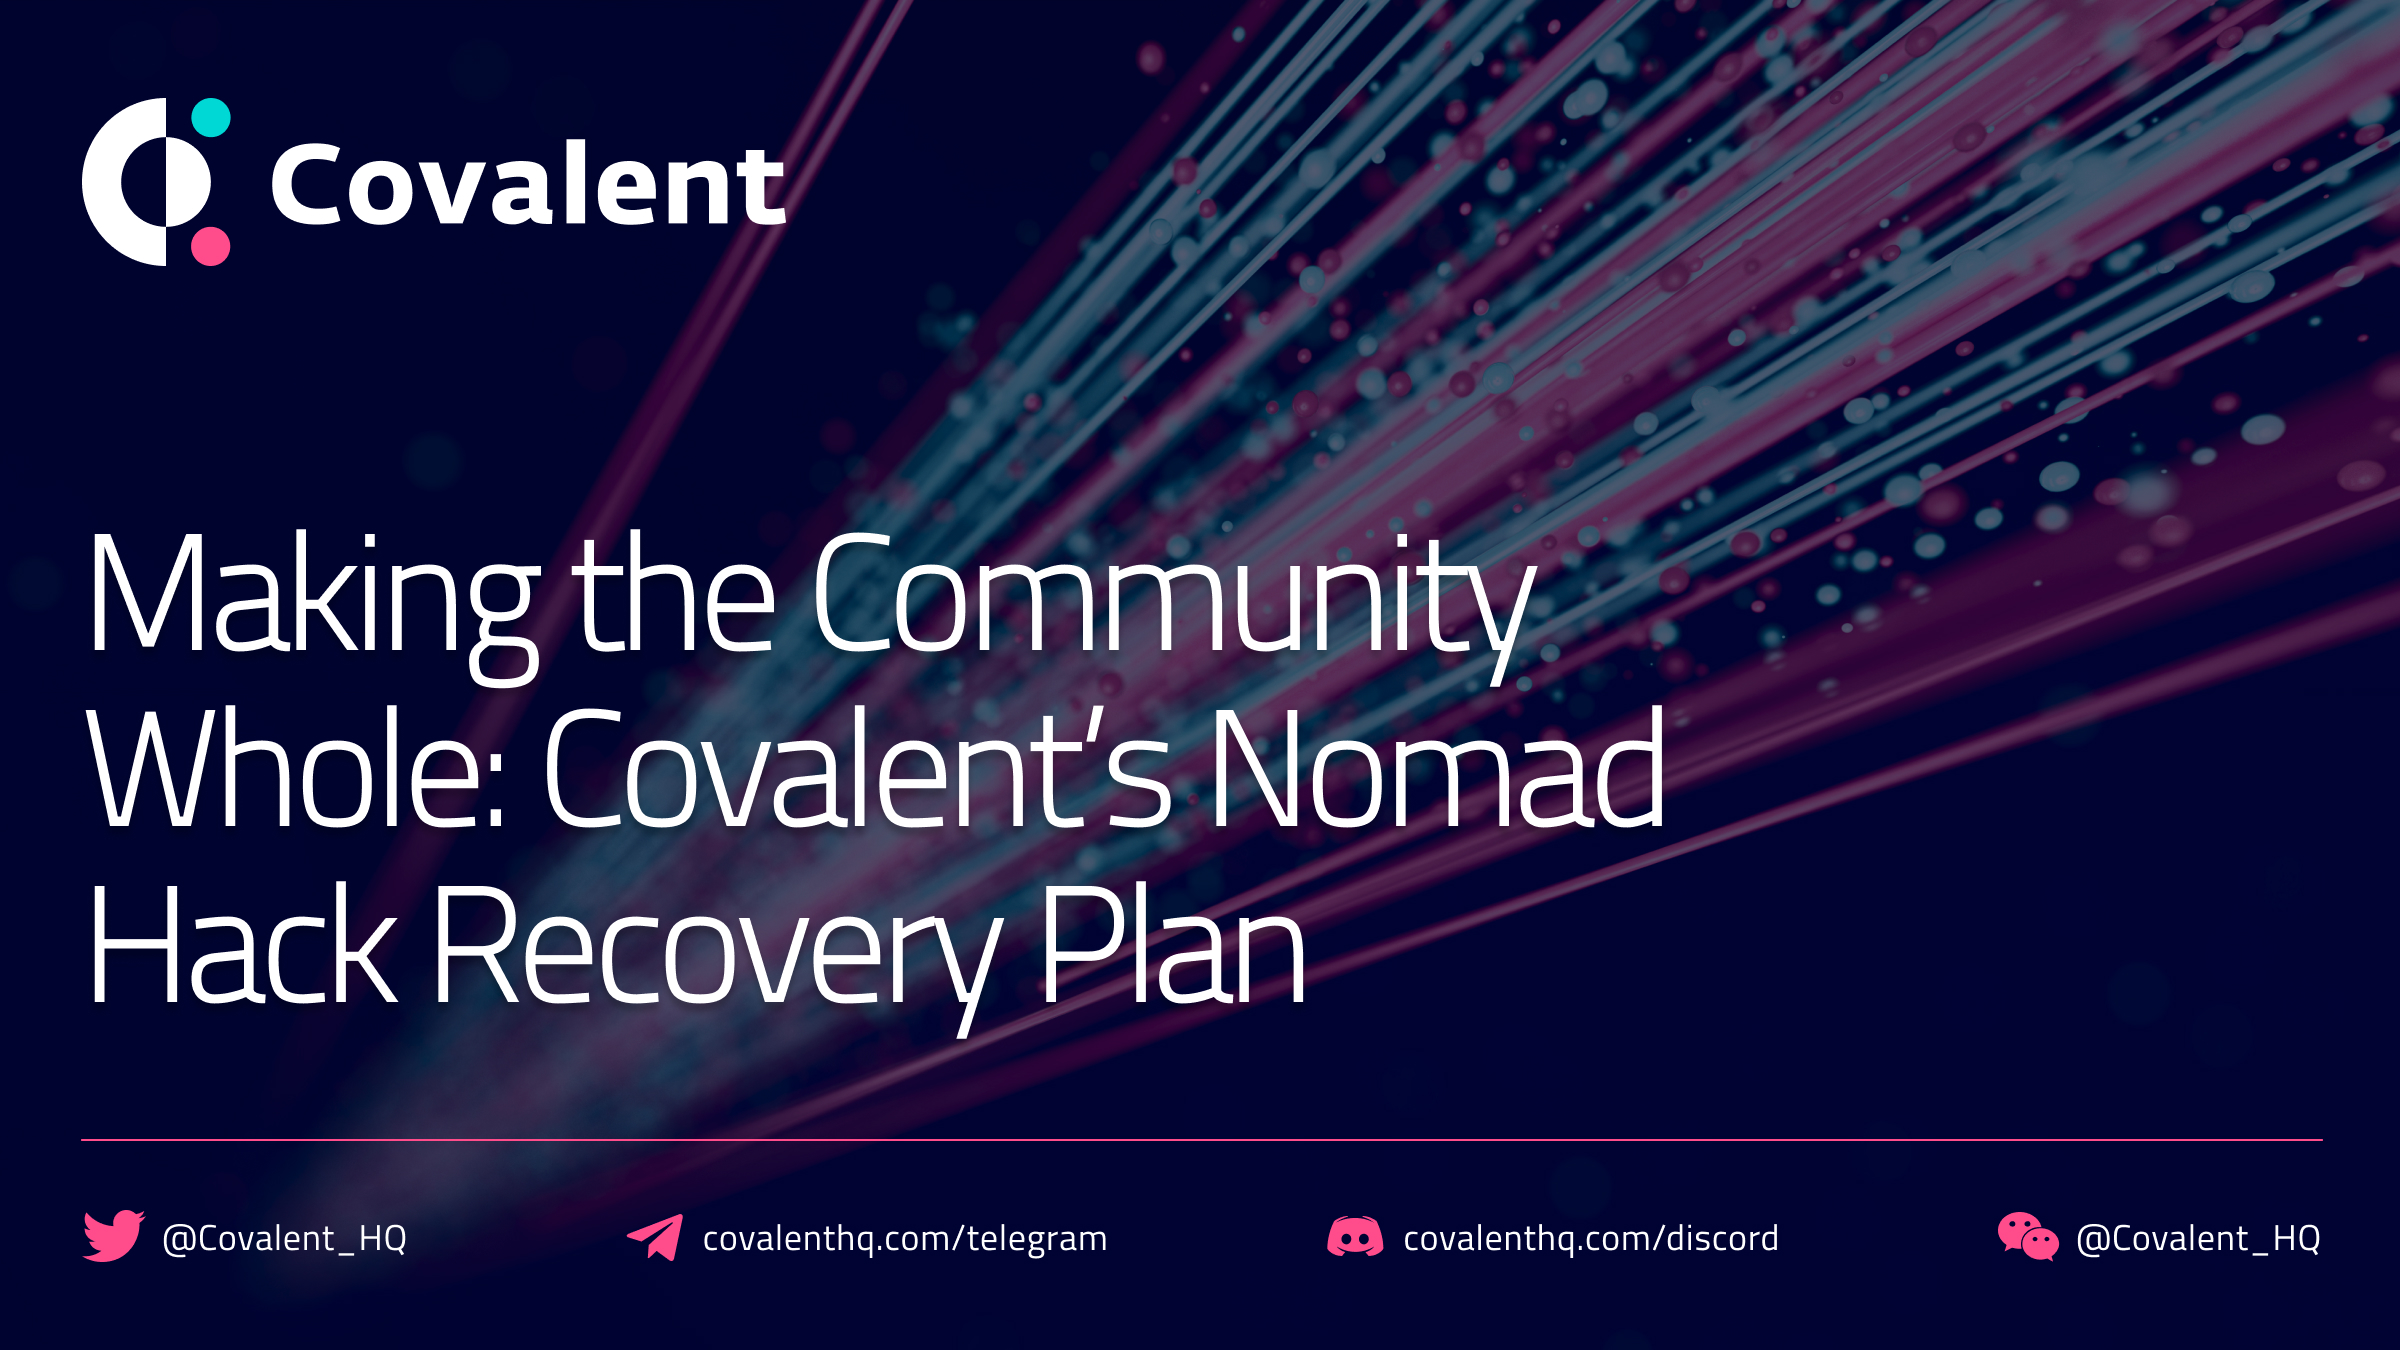 Making the Community Whole: Covalent’s Nomad Hack Recovery Plan